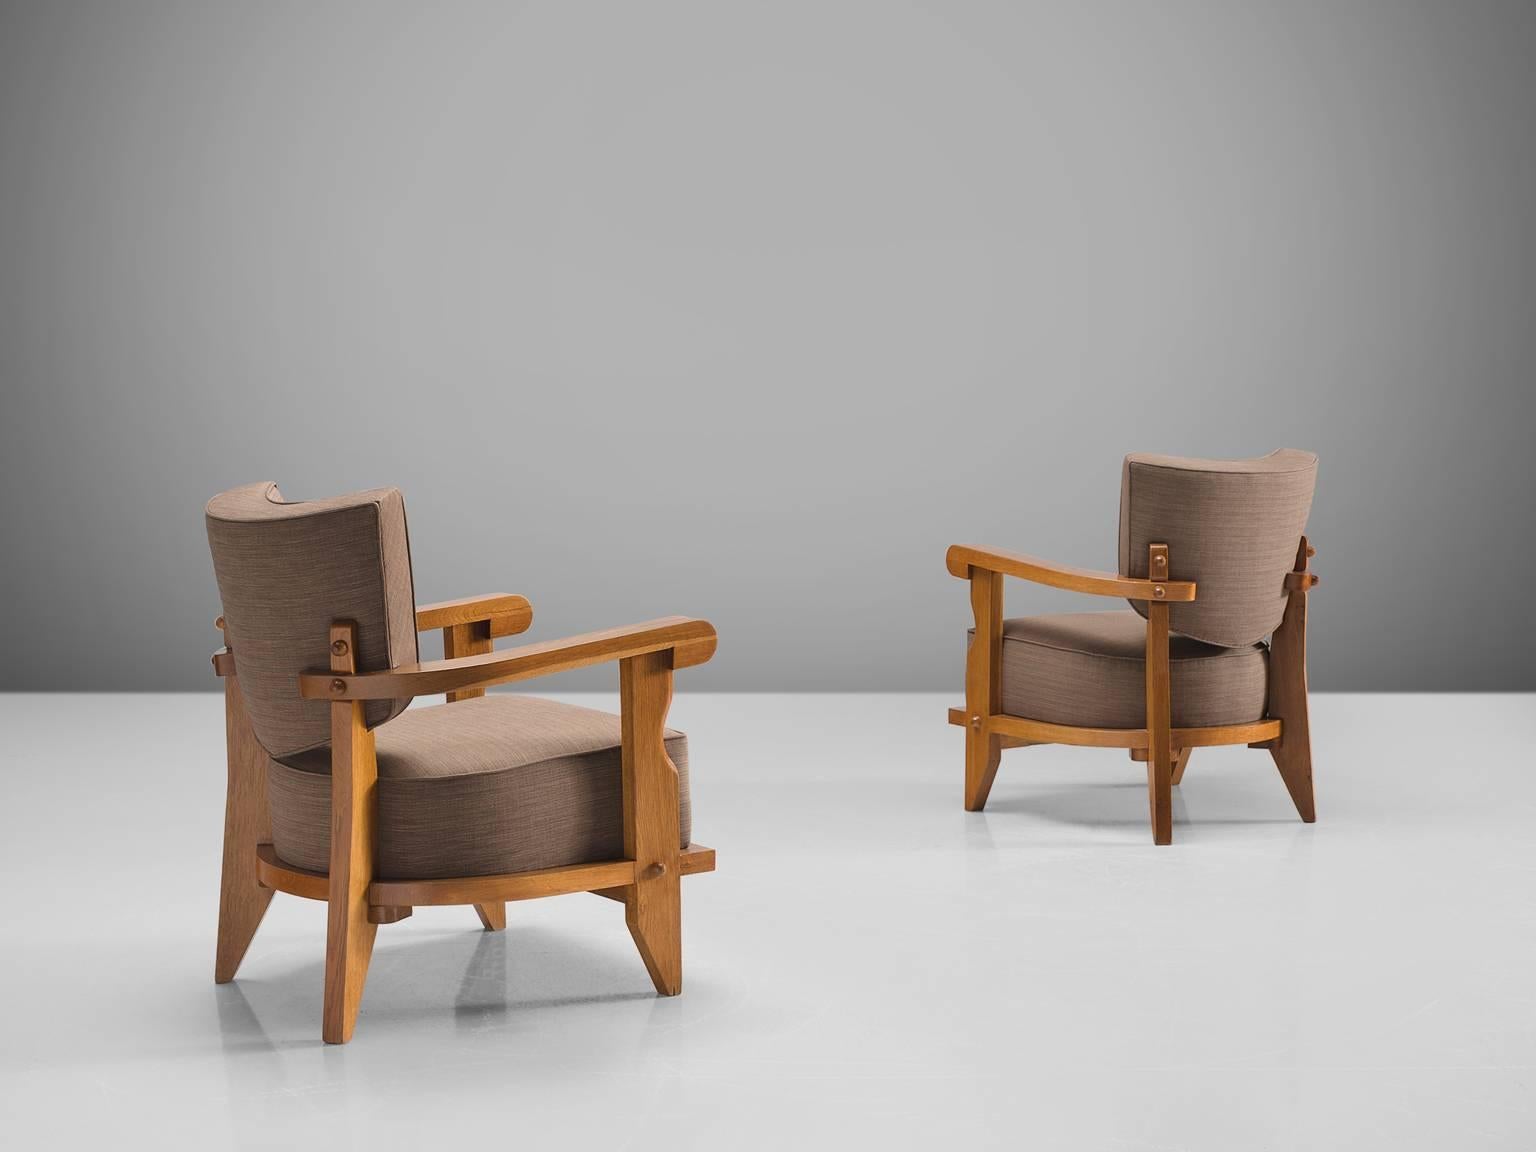 Jacques Chambron and Robert Guillerme, set of two easy chairs, grey fabric, oak, France, 1950s

This sculptural set of easy chairs by Guillerme and Chambron is very well executed and made out of solid, carved blond oak. This set of comfortable